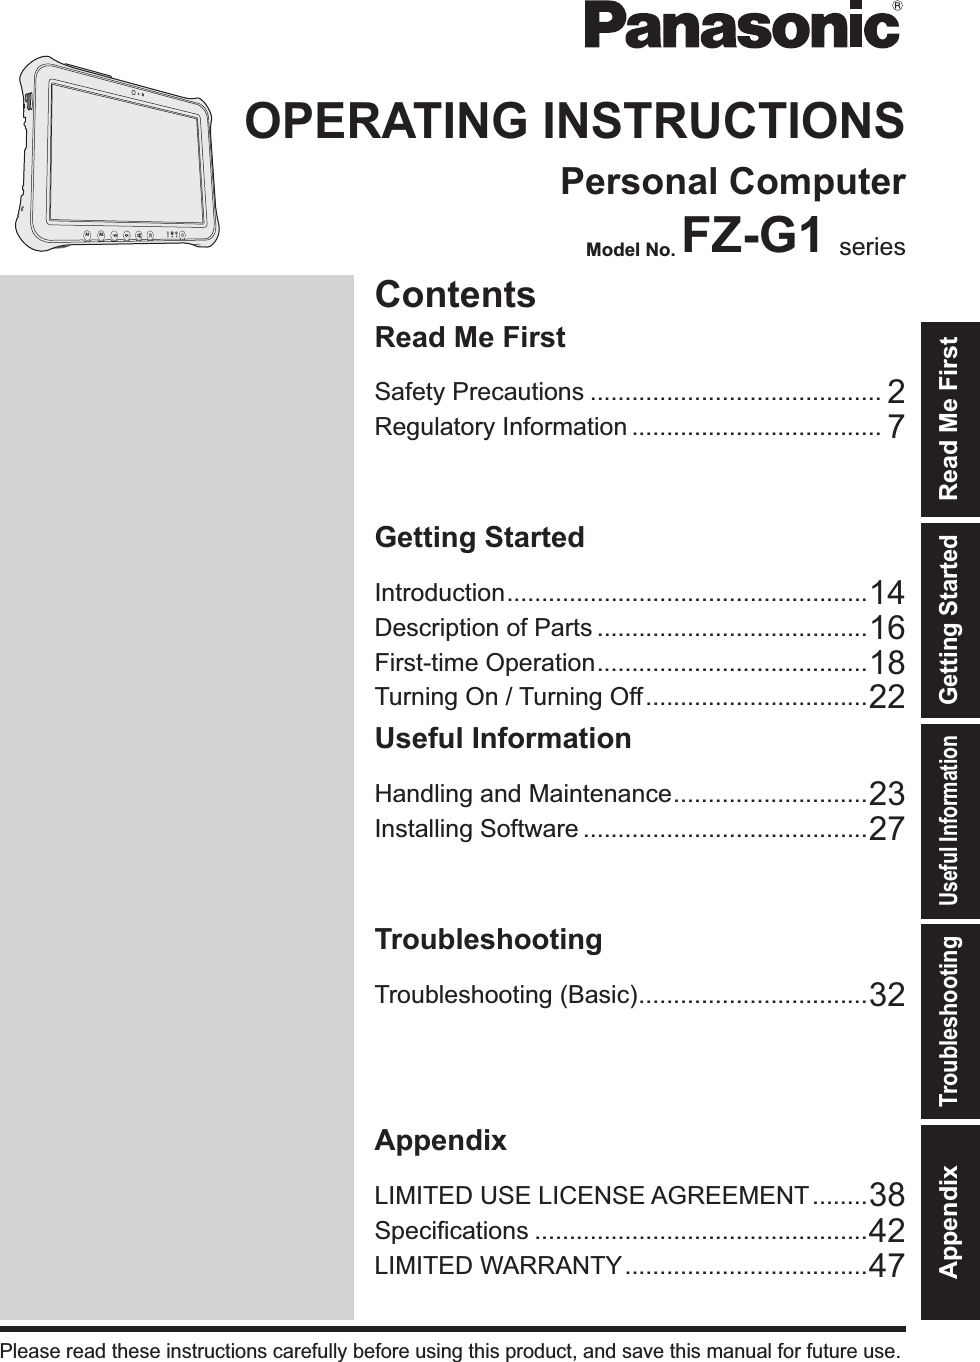 ContentsOPERATING INSTRUCTIONSPersonal ComputerModel No. FZ-G1 seriesIntroduction ....................................................14Description of Parts .......................................16First-time Operation .......................................18Turning On / Turning Off ................................22Useful InformationHandling and Maintenance ............................23Installing Software .........................................27TroubleshootingTroubleshooting (Basic) .................................32AppendixLIMITED USE LICENSE AGREEMENT ........38!&quot;#$%&amp;$&apos;(%)*+ ................................................42LIMITED WARRANTY ...................................47Please read these instructions carefully before using this product, and save this manual for future use.Getting StartedUseful InformationTroubleshootingAppendix Read Me FirstGetting StartedSafety Precautions .......................................... 2Regulatory Information .................................... 7Read Me FirstA2A1&amp;(39&lt;#6A(&lt;)OMAAA1+A/KPFD 